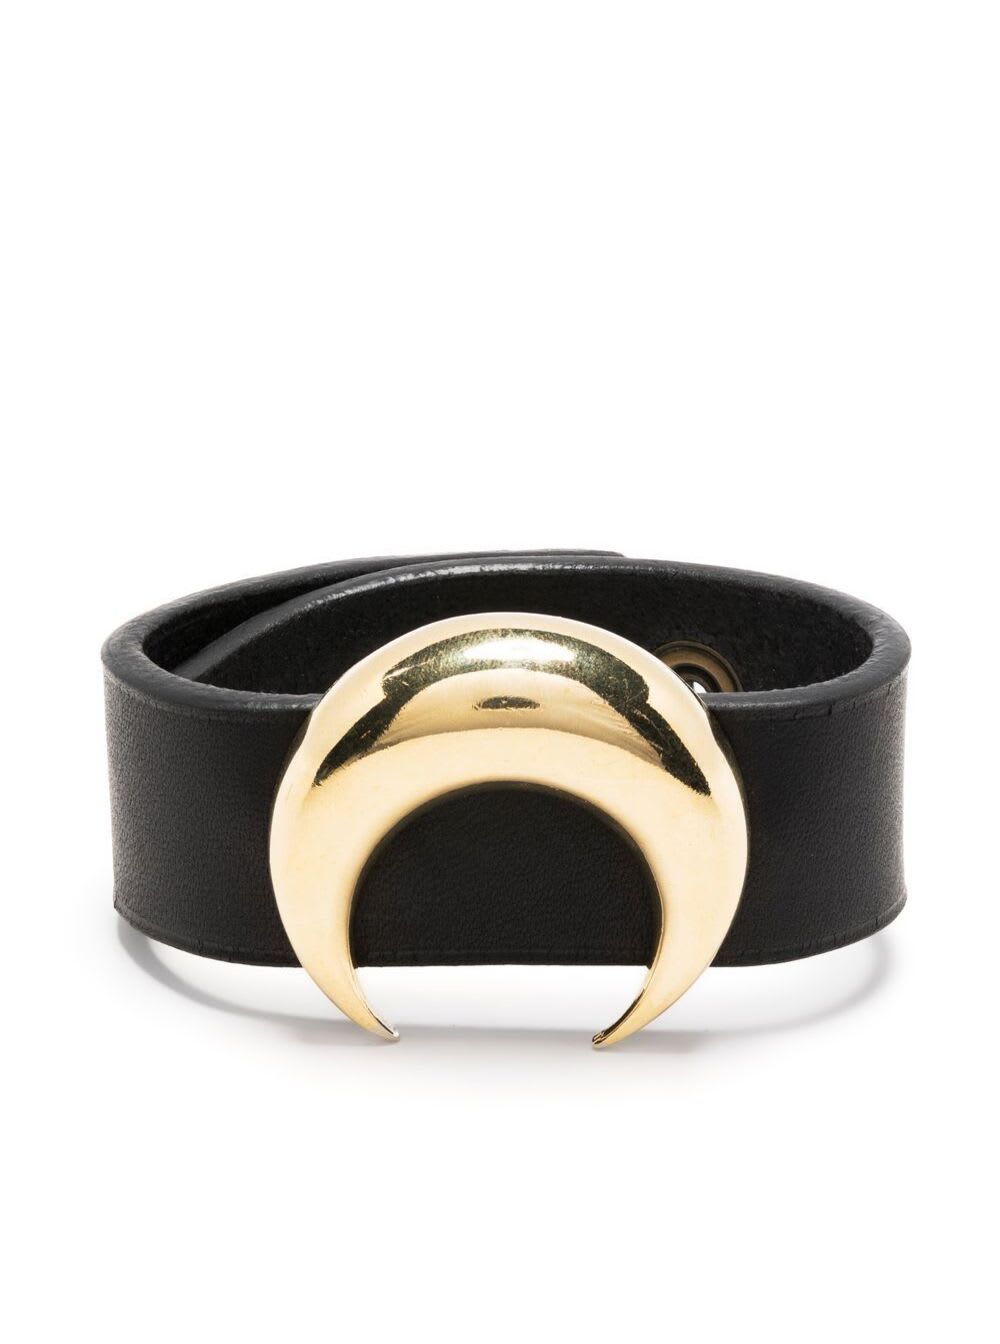 MARINE SERRE BLACK BRACELET WITH LOGO DETAIL IN SMOOTH LEATHER WOMAN